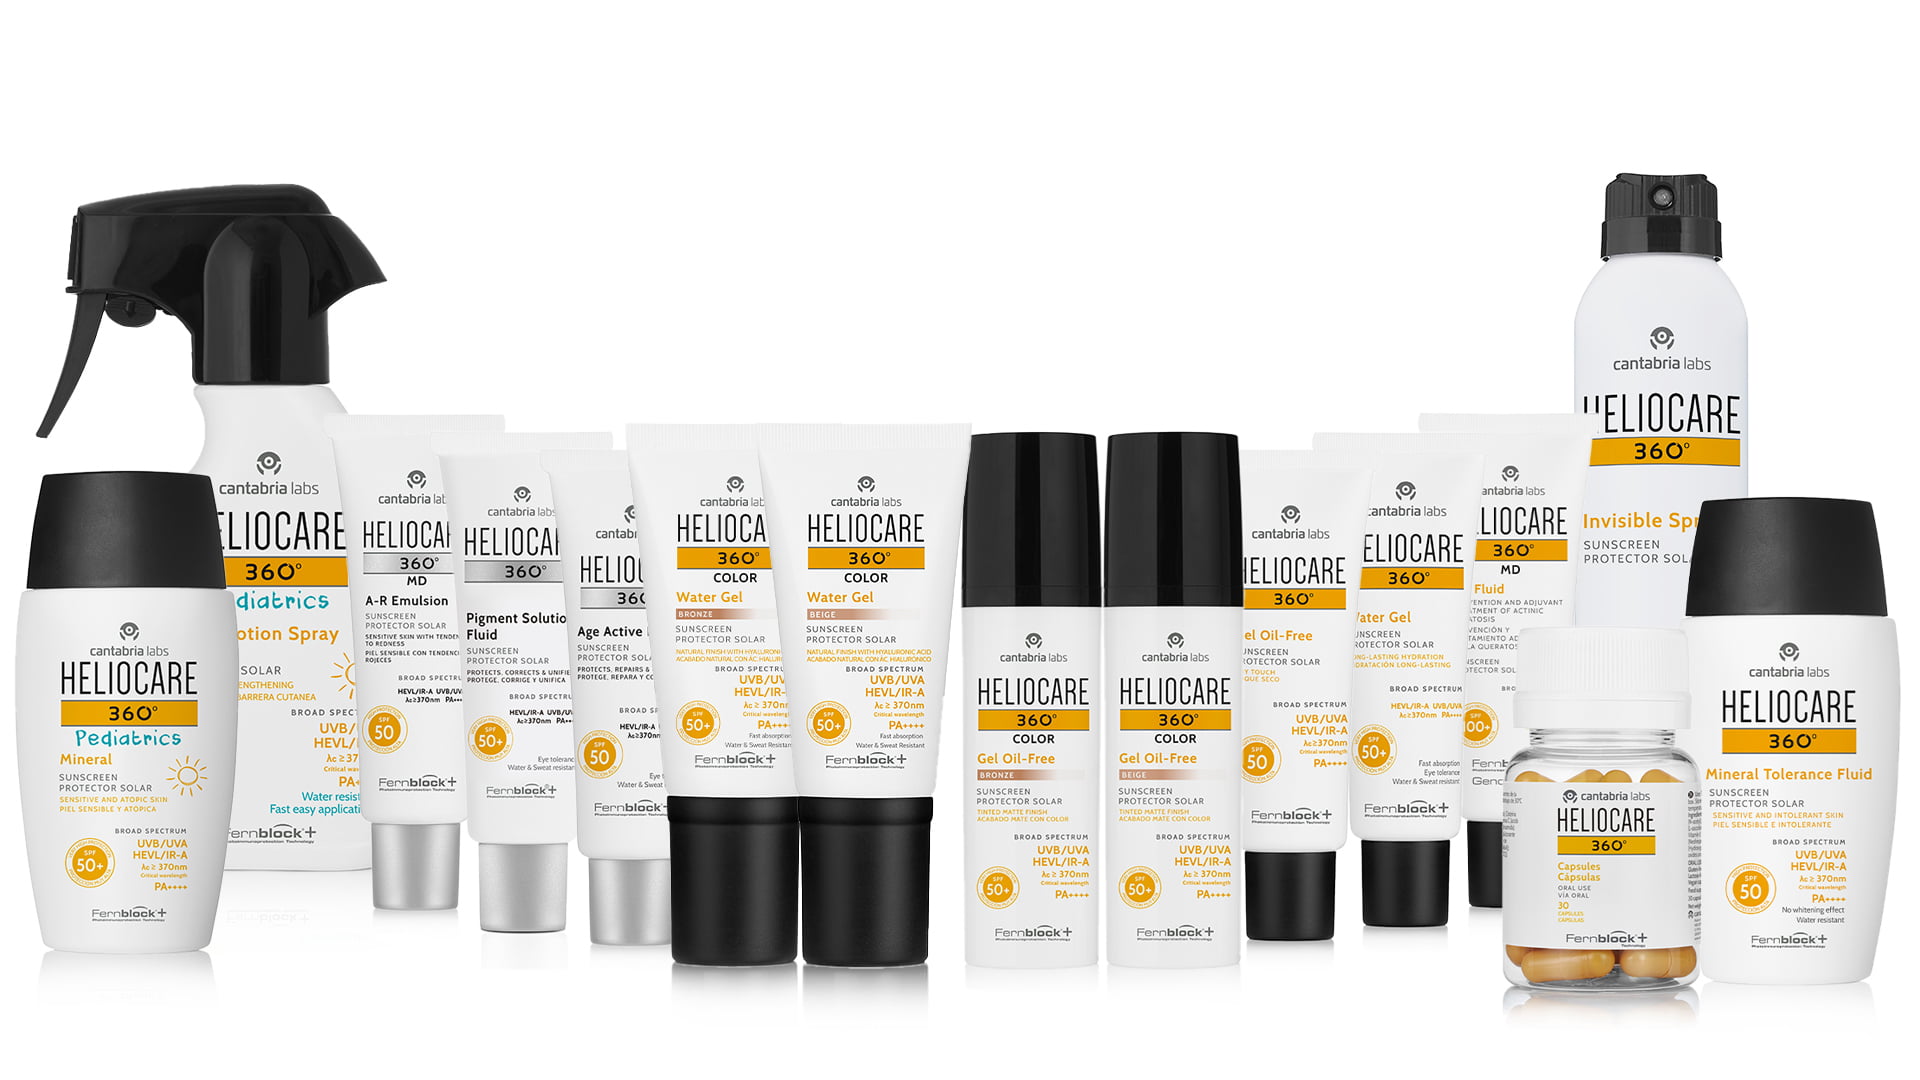 Heliocare 360° range of products